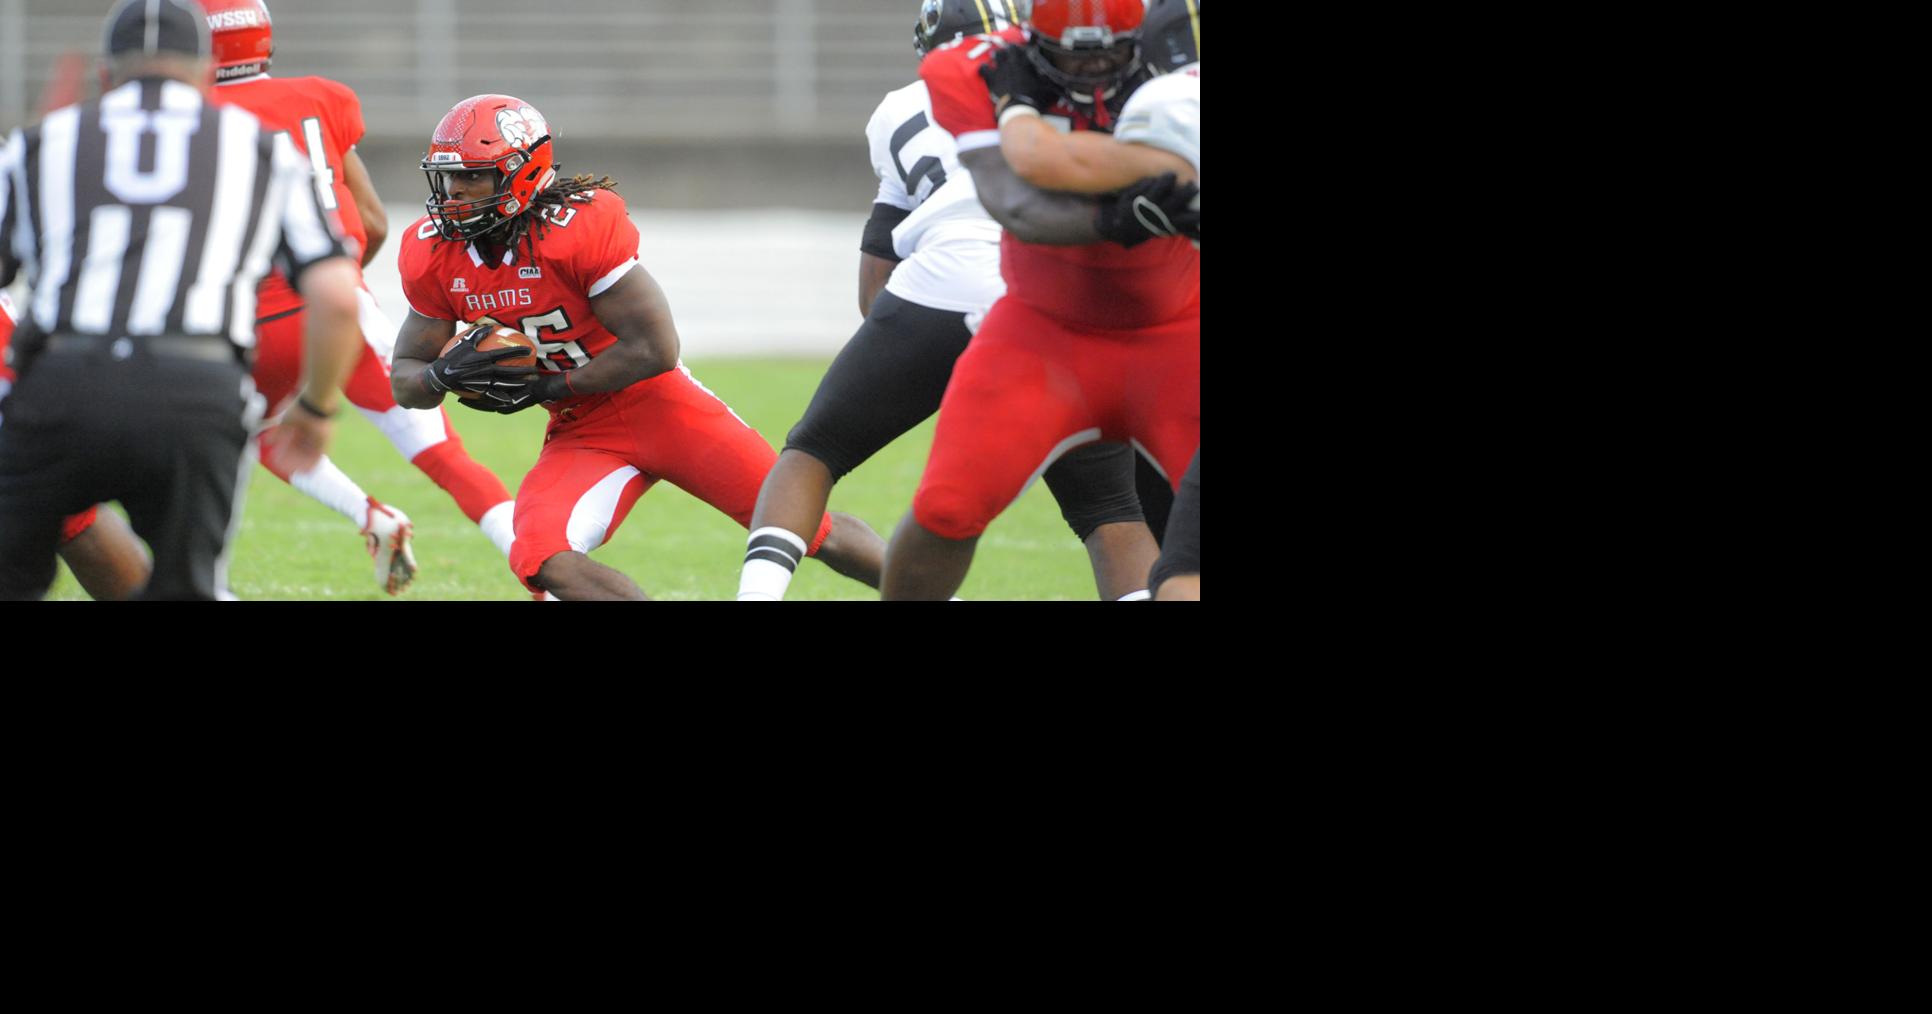 WSSU ready for game against St. Aug's